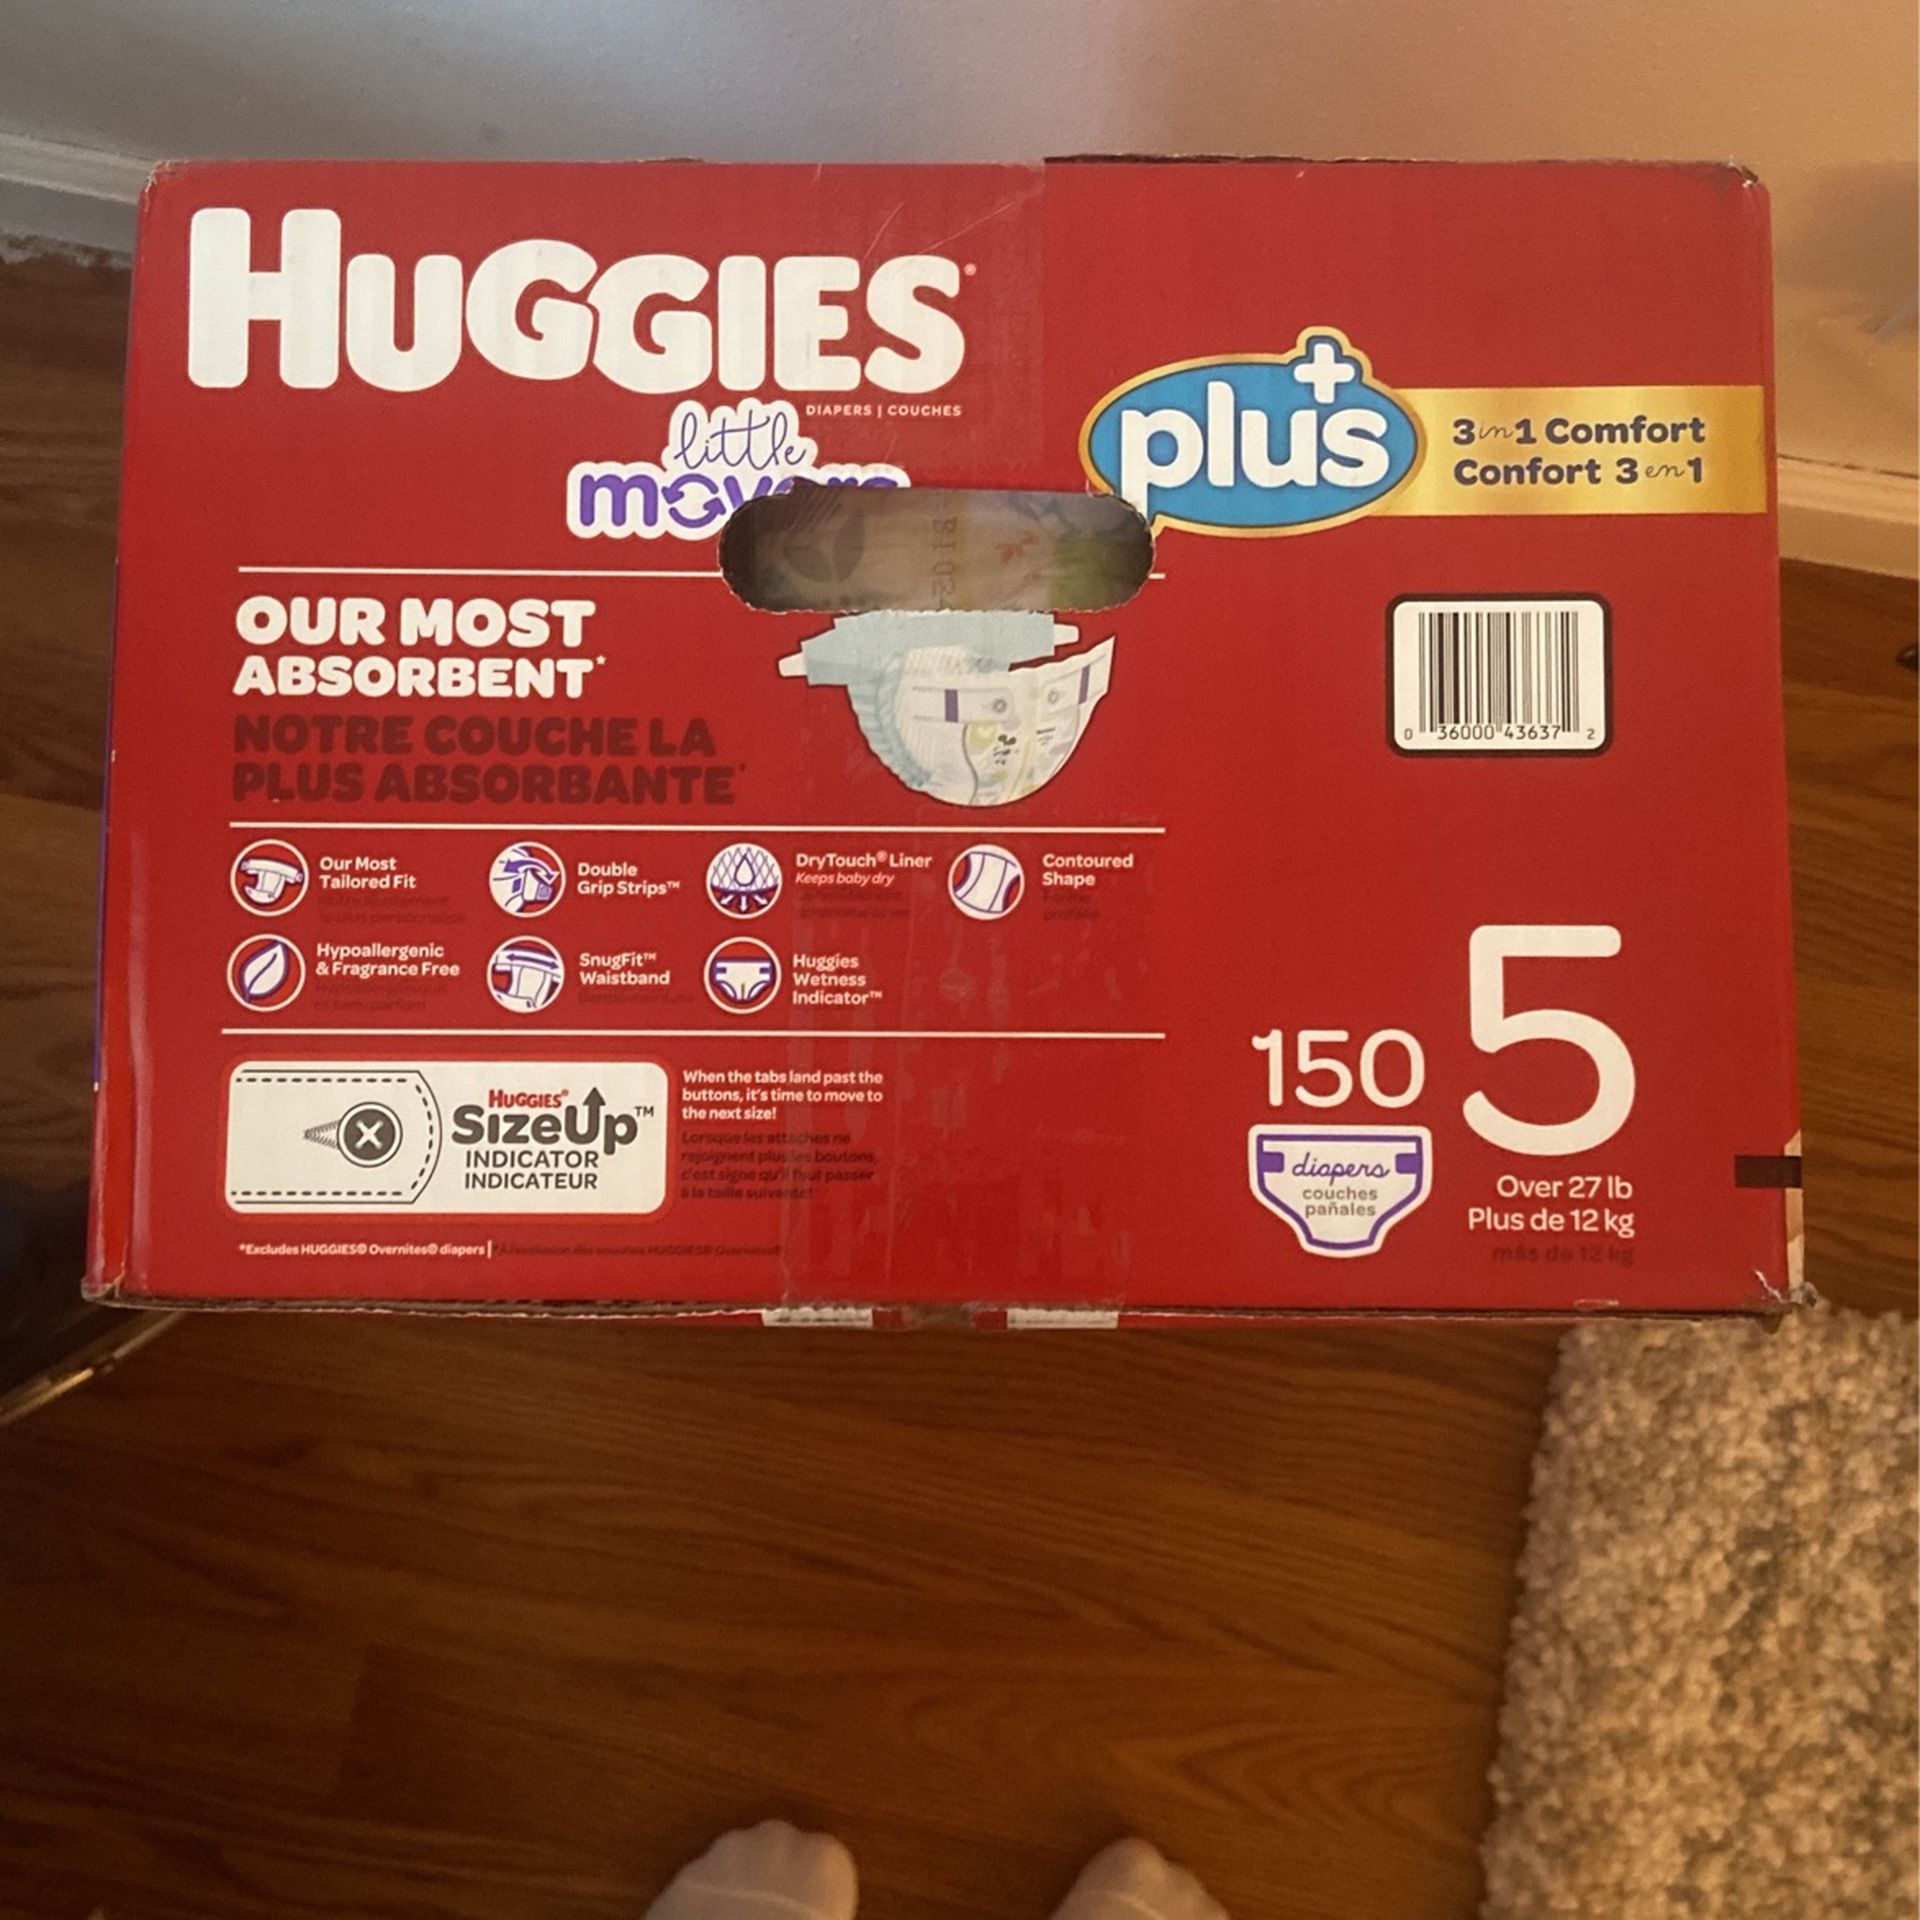 Huggies Little Movers Size 5